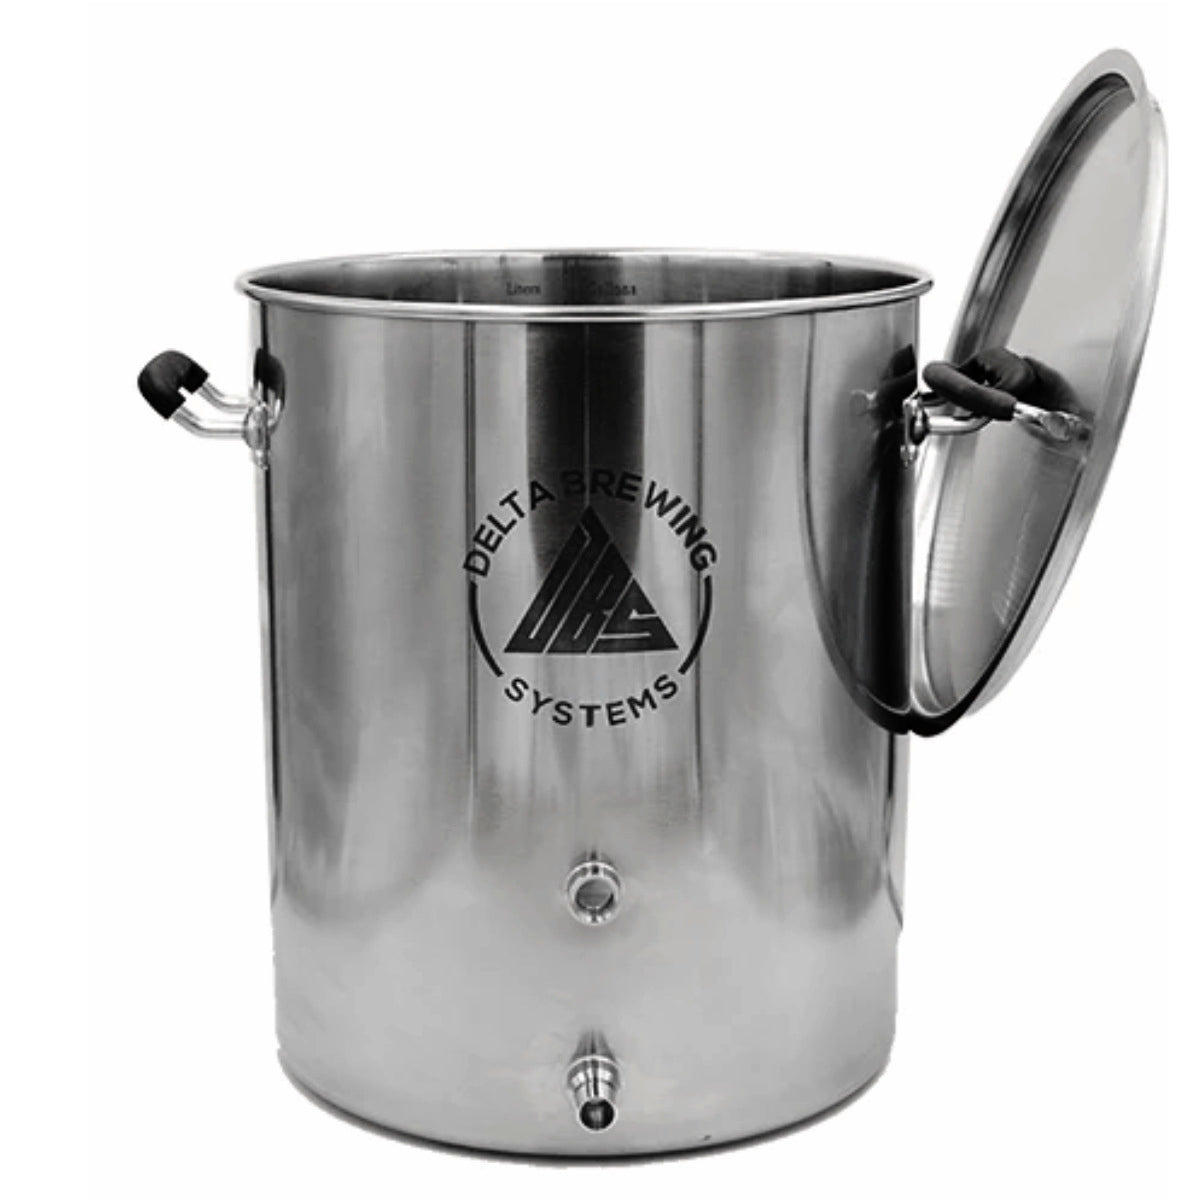 Buy a 15 gallon Brew Kettle For Home Brewing, We Have Options